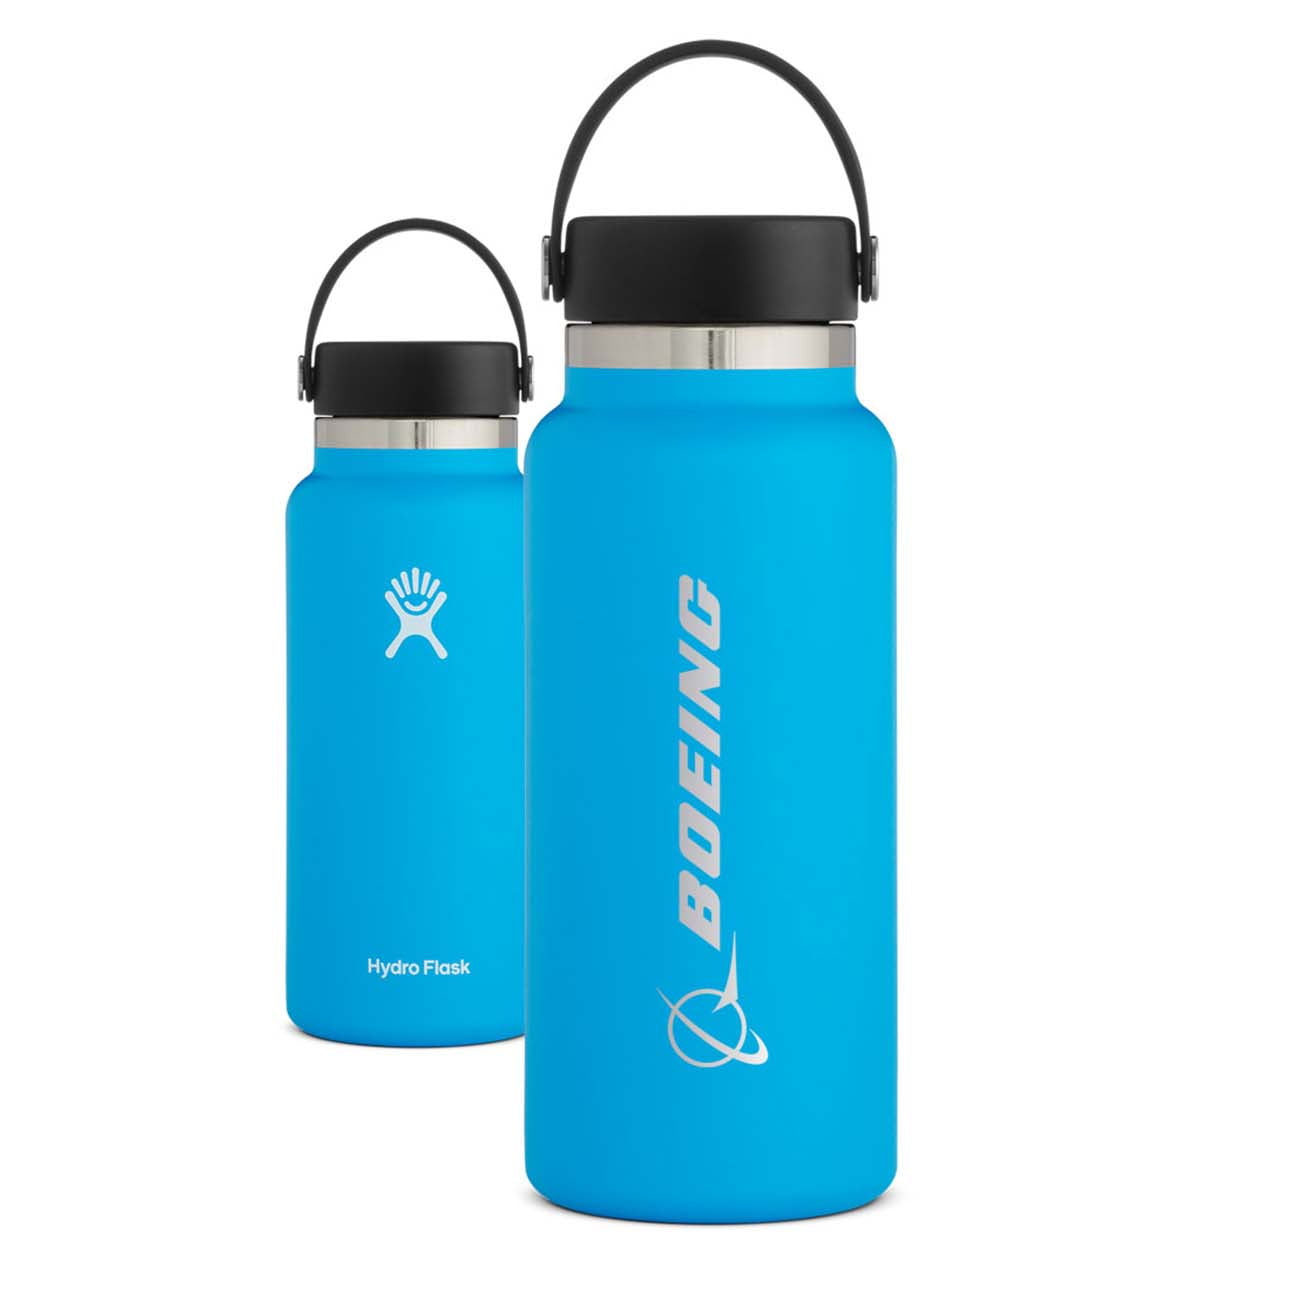 Hydroflask Boeing Water – The Boeing